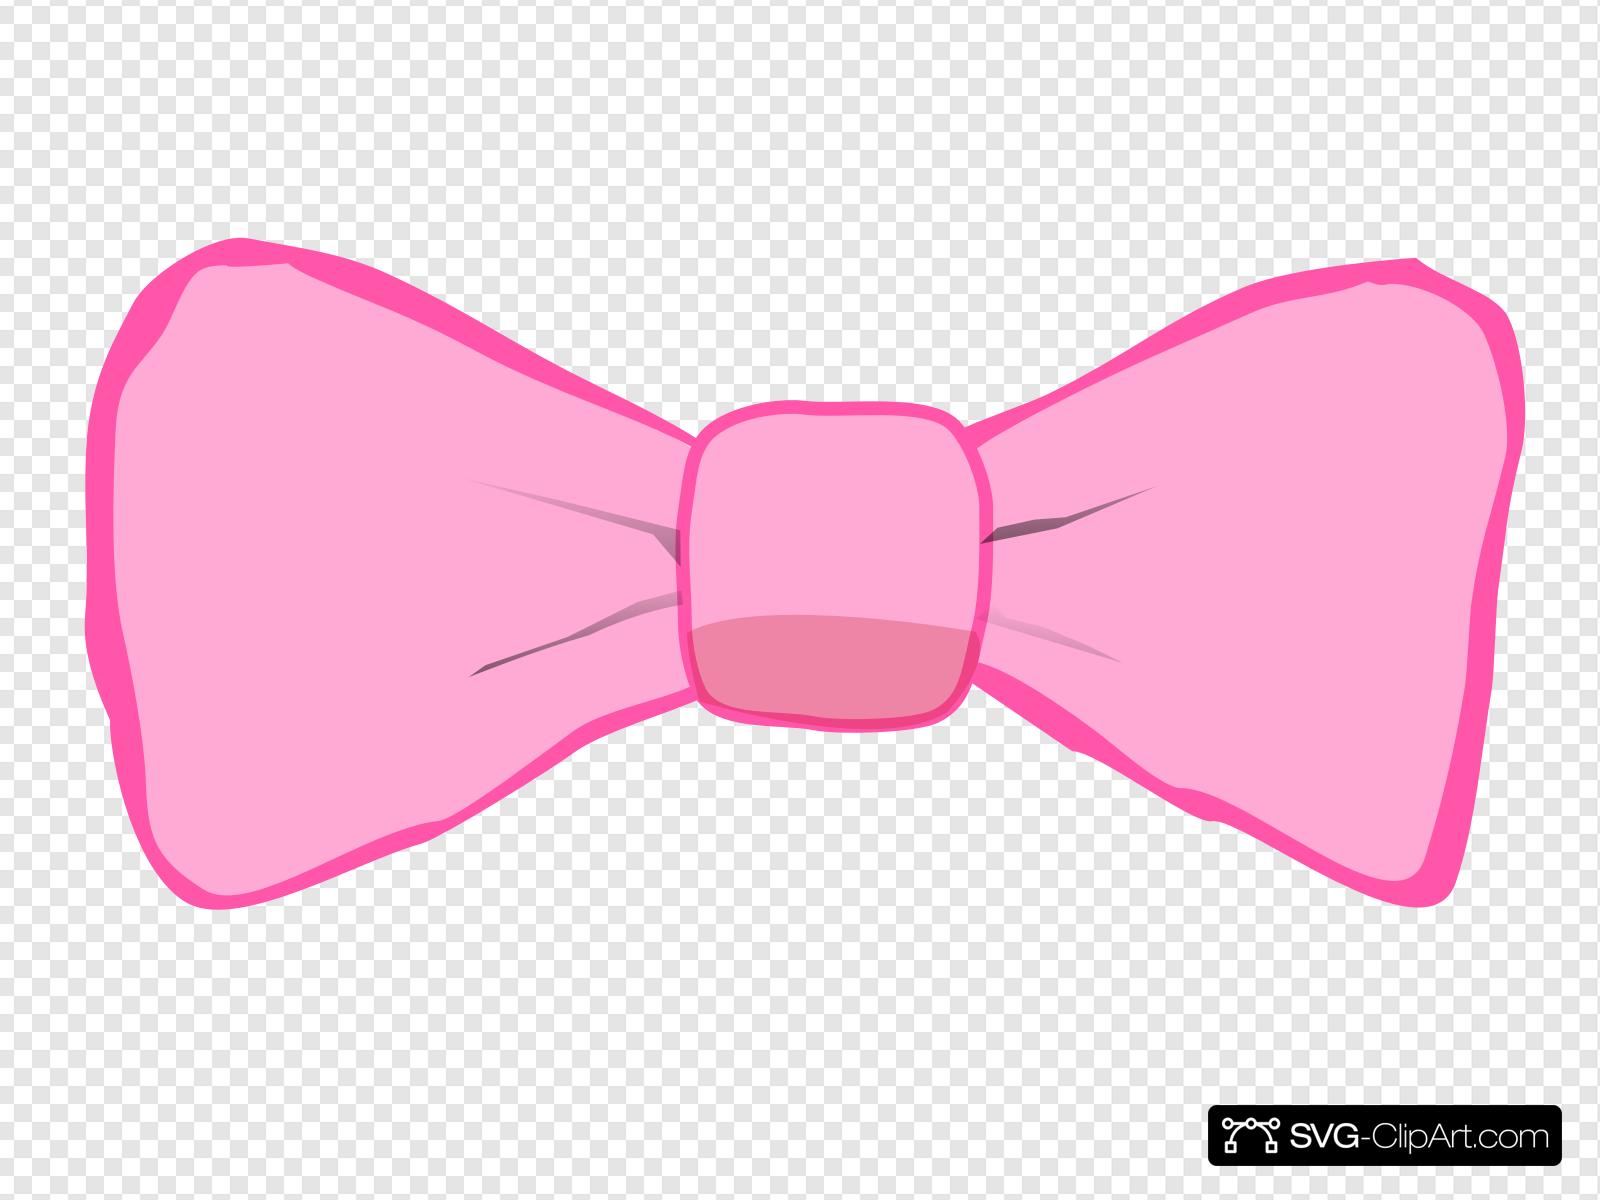 Pink pink bow.